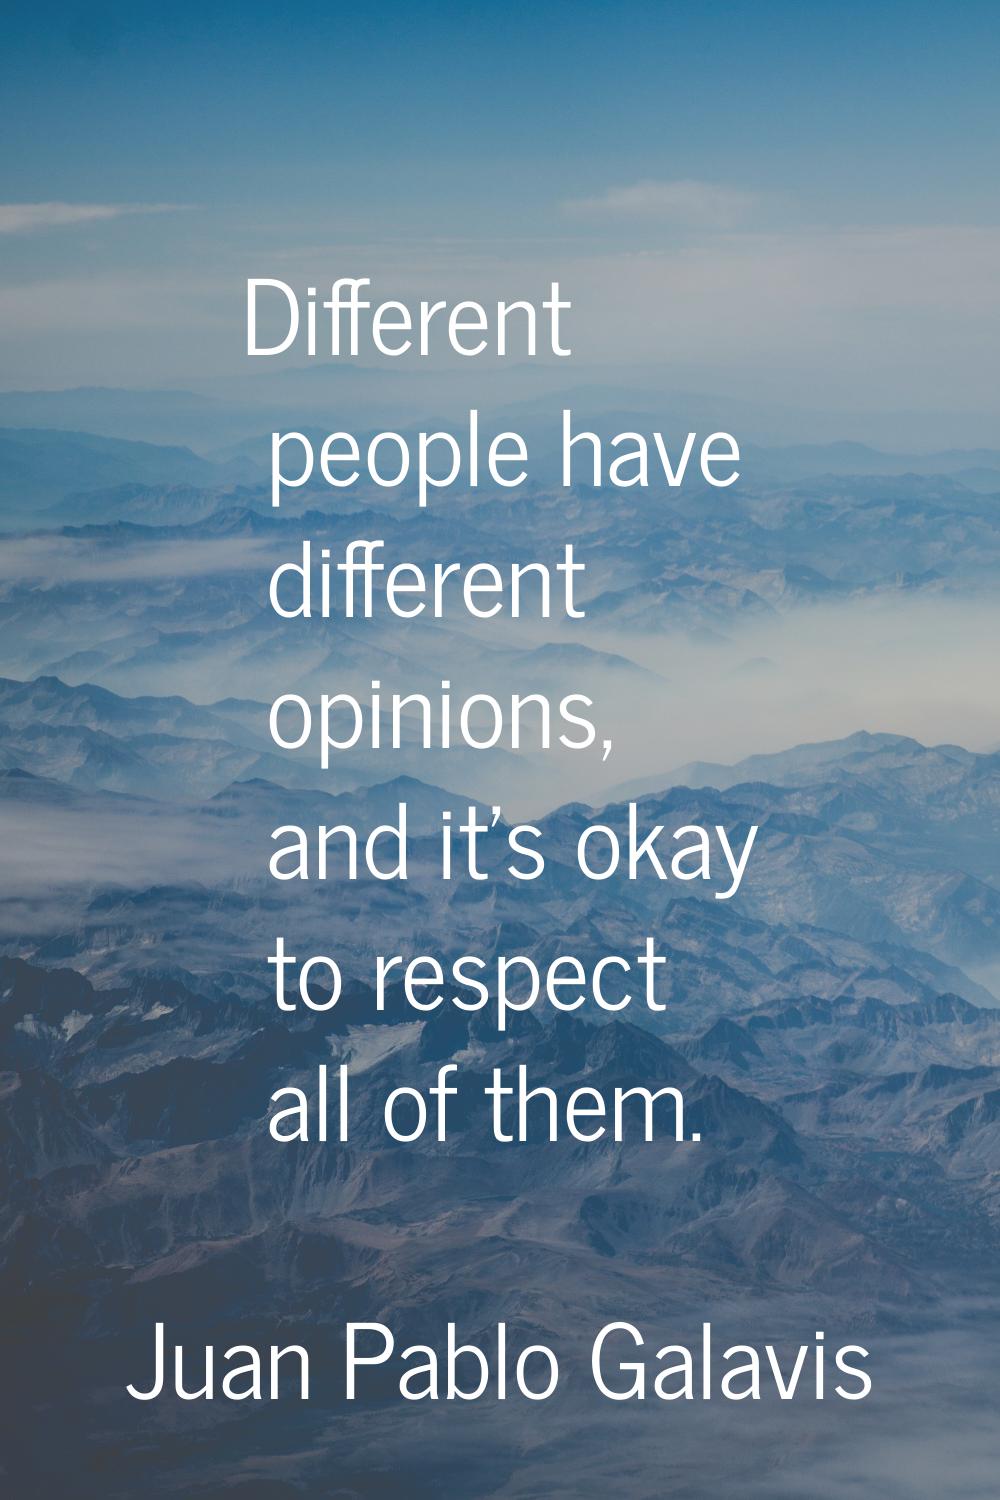 Different people have different opinions, and it's okay to respect all of them.